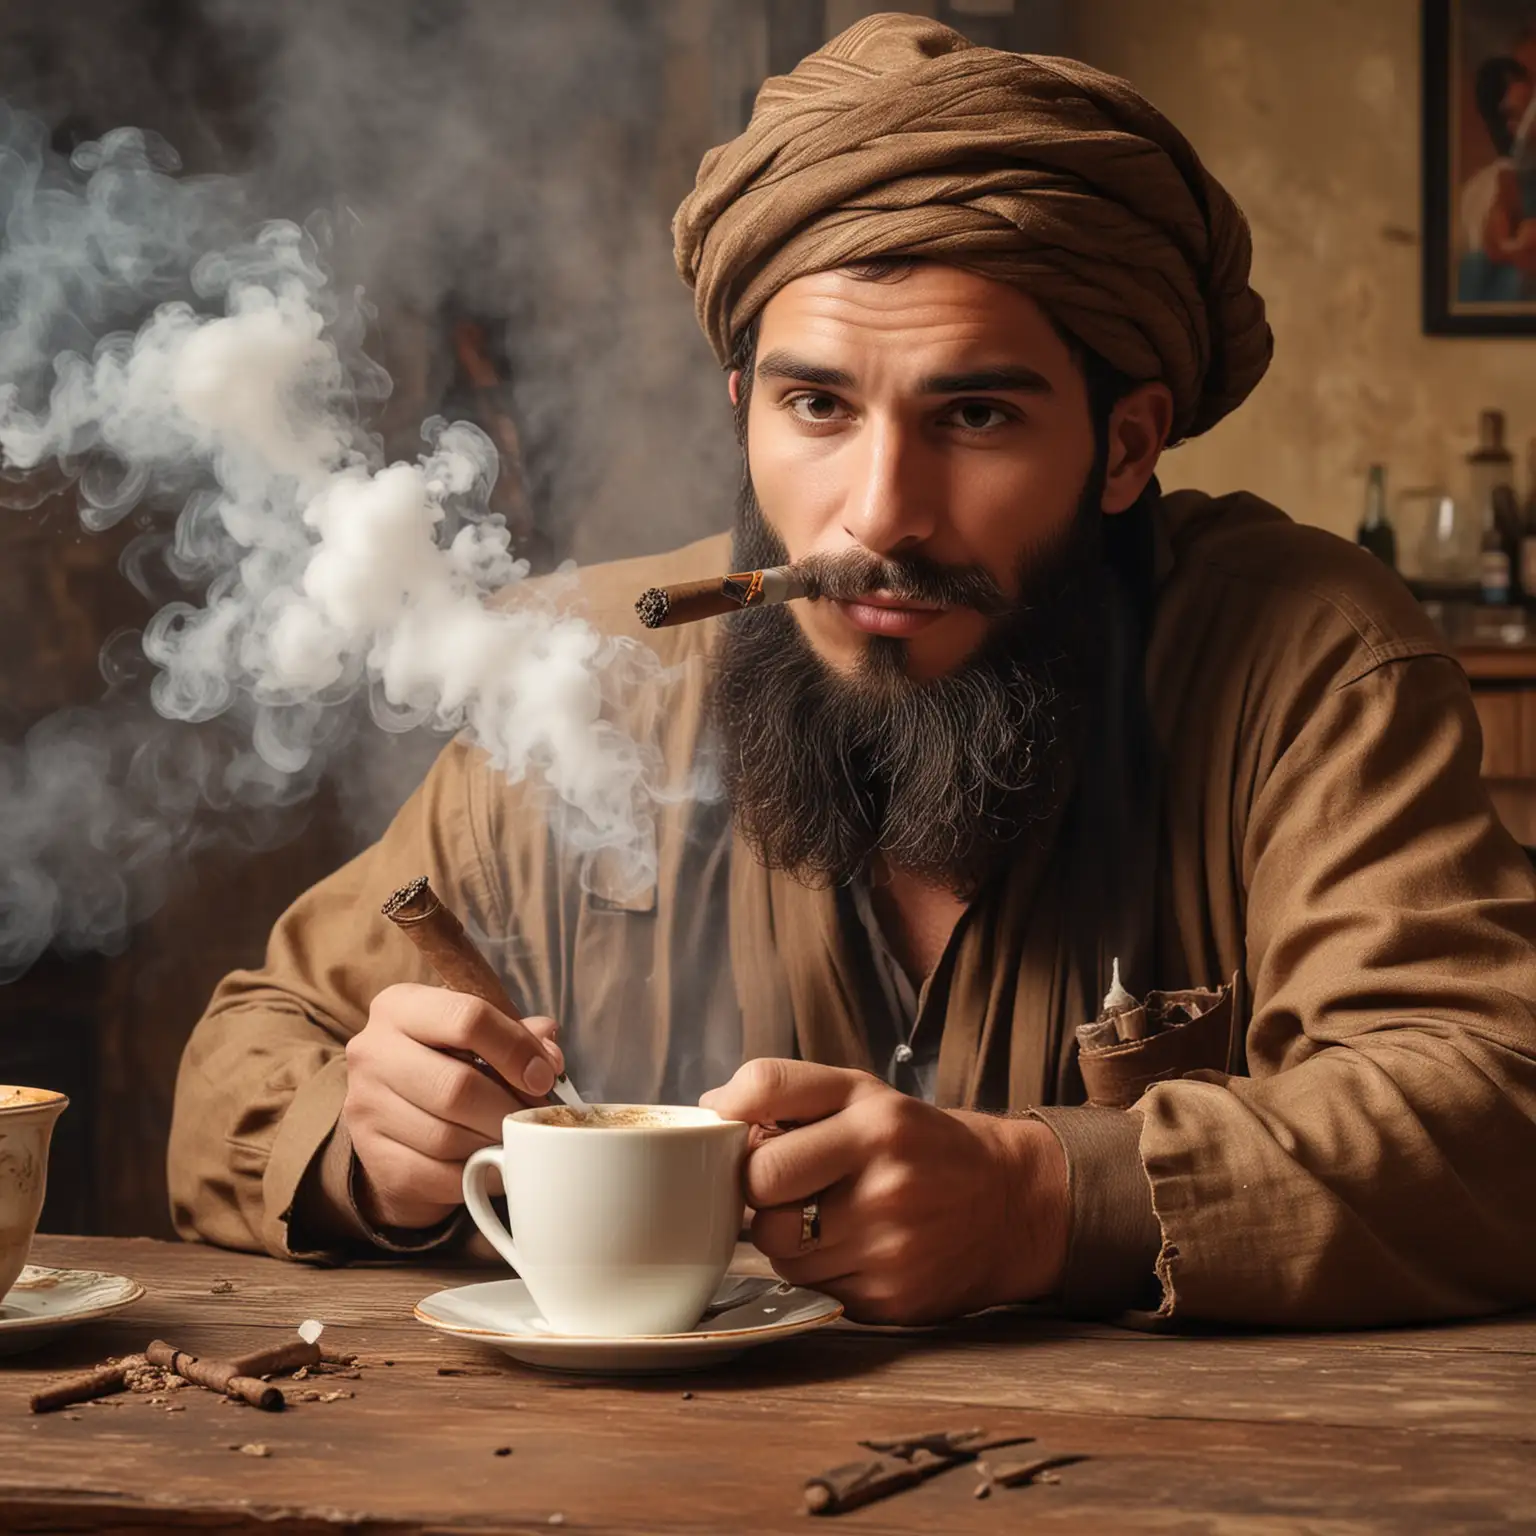 Guy drinking cappuccino, smoke big cuban sigar.  , make the mug on the table, very funny , comedy atmosphere, Hollywood movie style , taliban look, 50s Studio atmosphere . Make fingers hyper realistic 